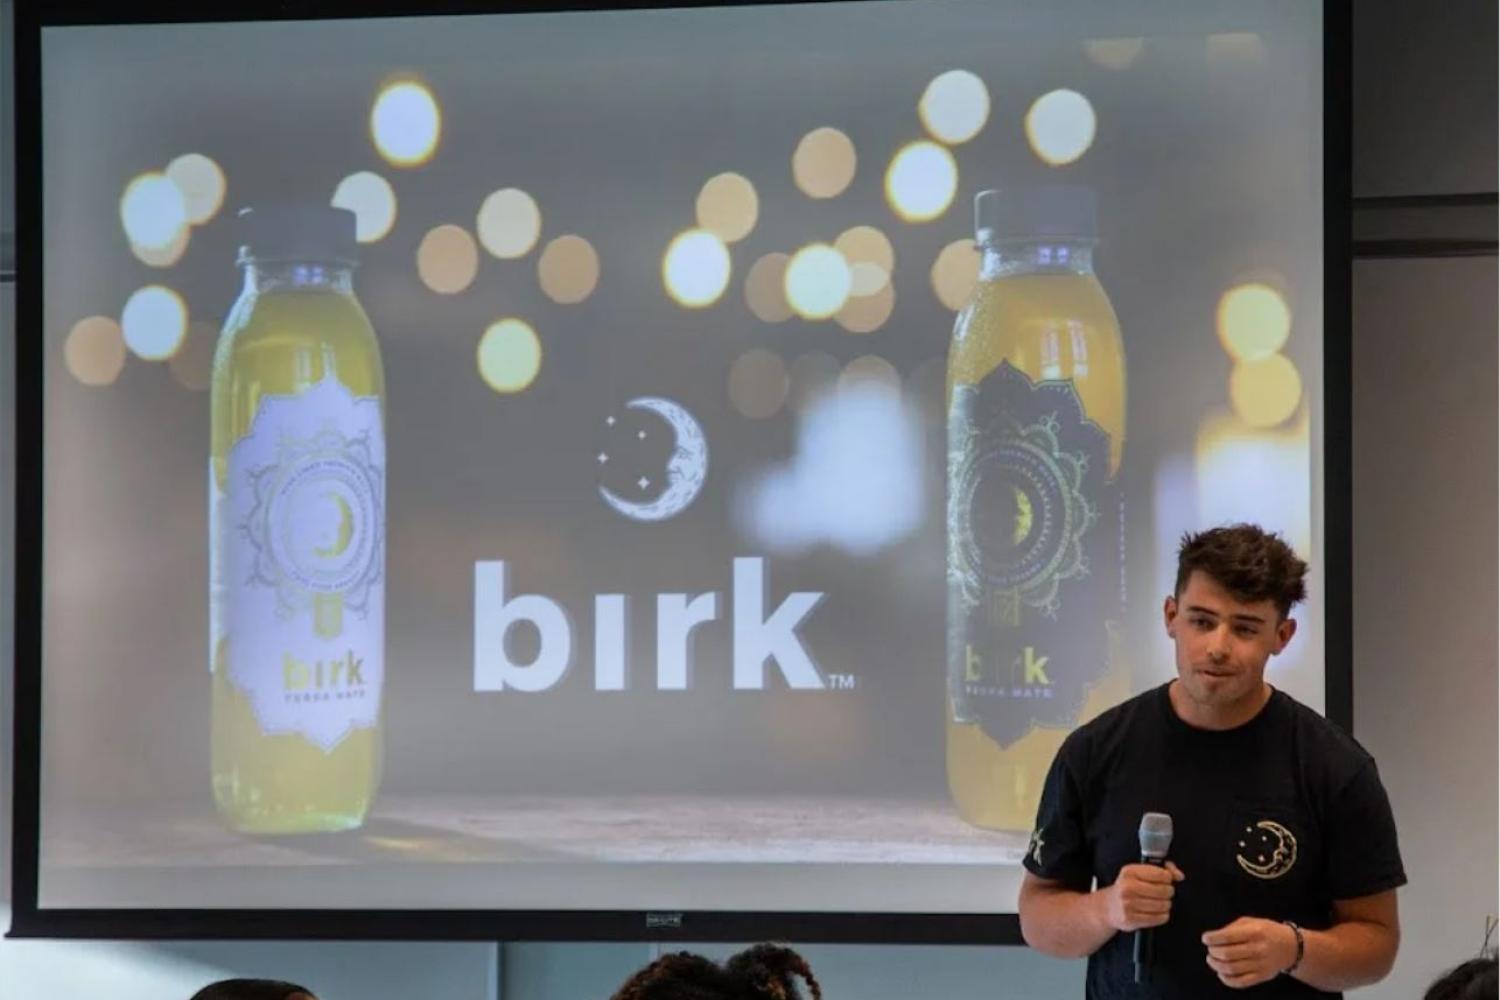 Birk pitching at New Venture Launch